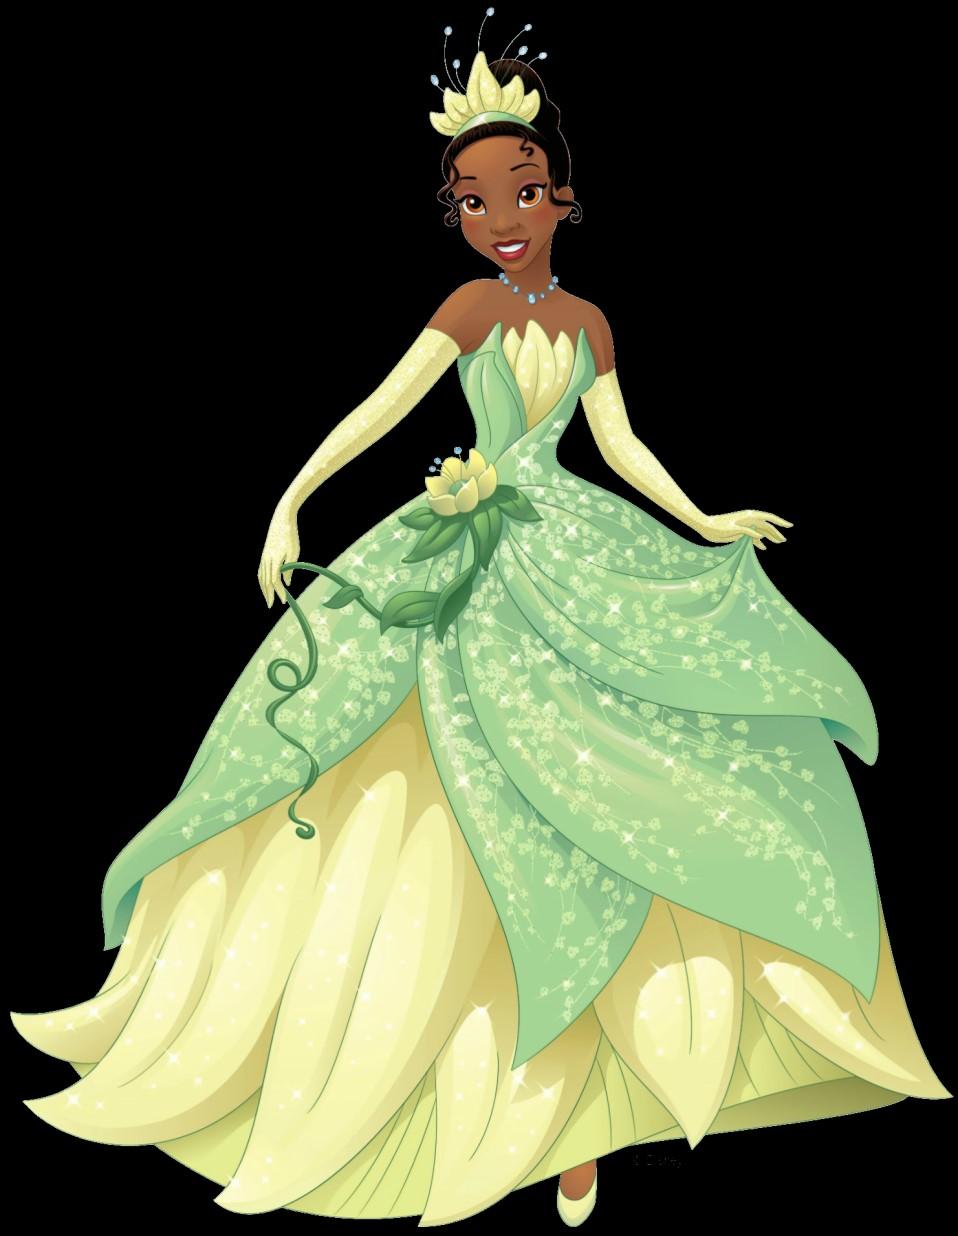 Tiana Face: Dark skin, contouring, wine colored blush Eye Shadow: Soft Green Tones, Gold Accents Lip: Brown Pink with Gold Undertones, Thick Lips Brow: Black, medium/thin,